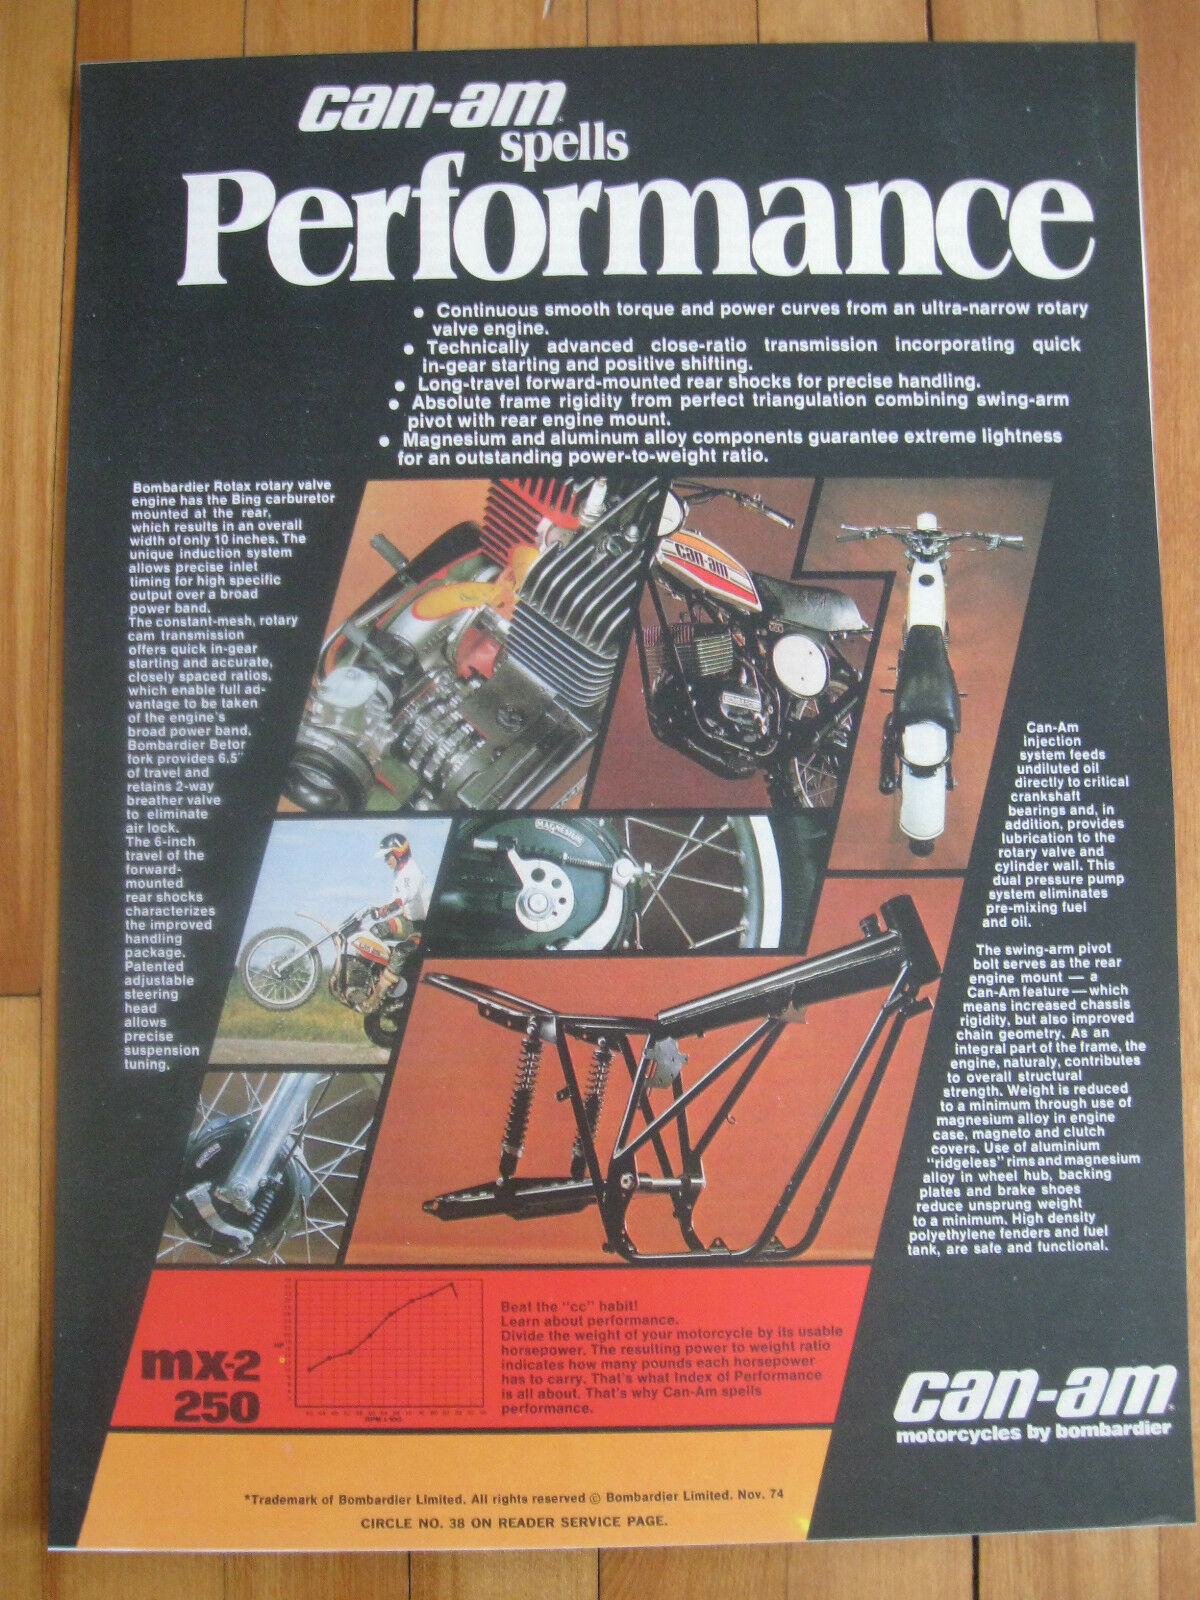 CAN-AM MX 2 250 VINTAGE GARAGE SHOP POSTER ROTAX BOMBARDIER